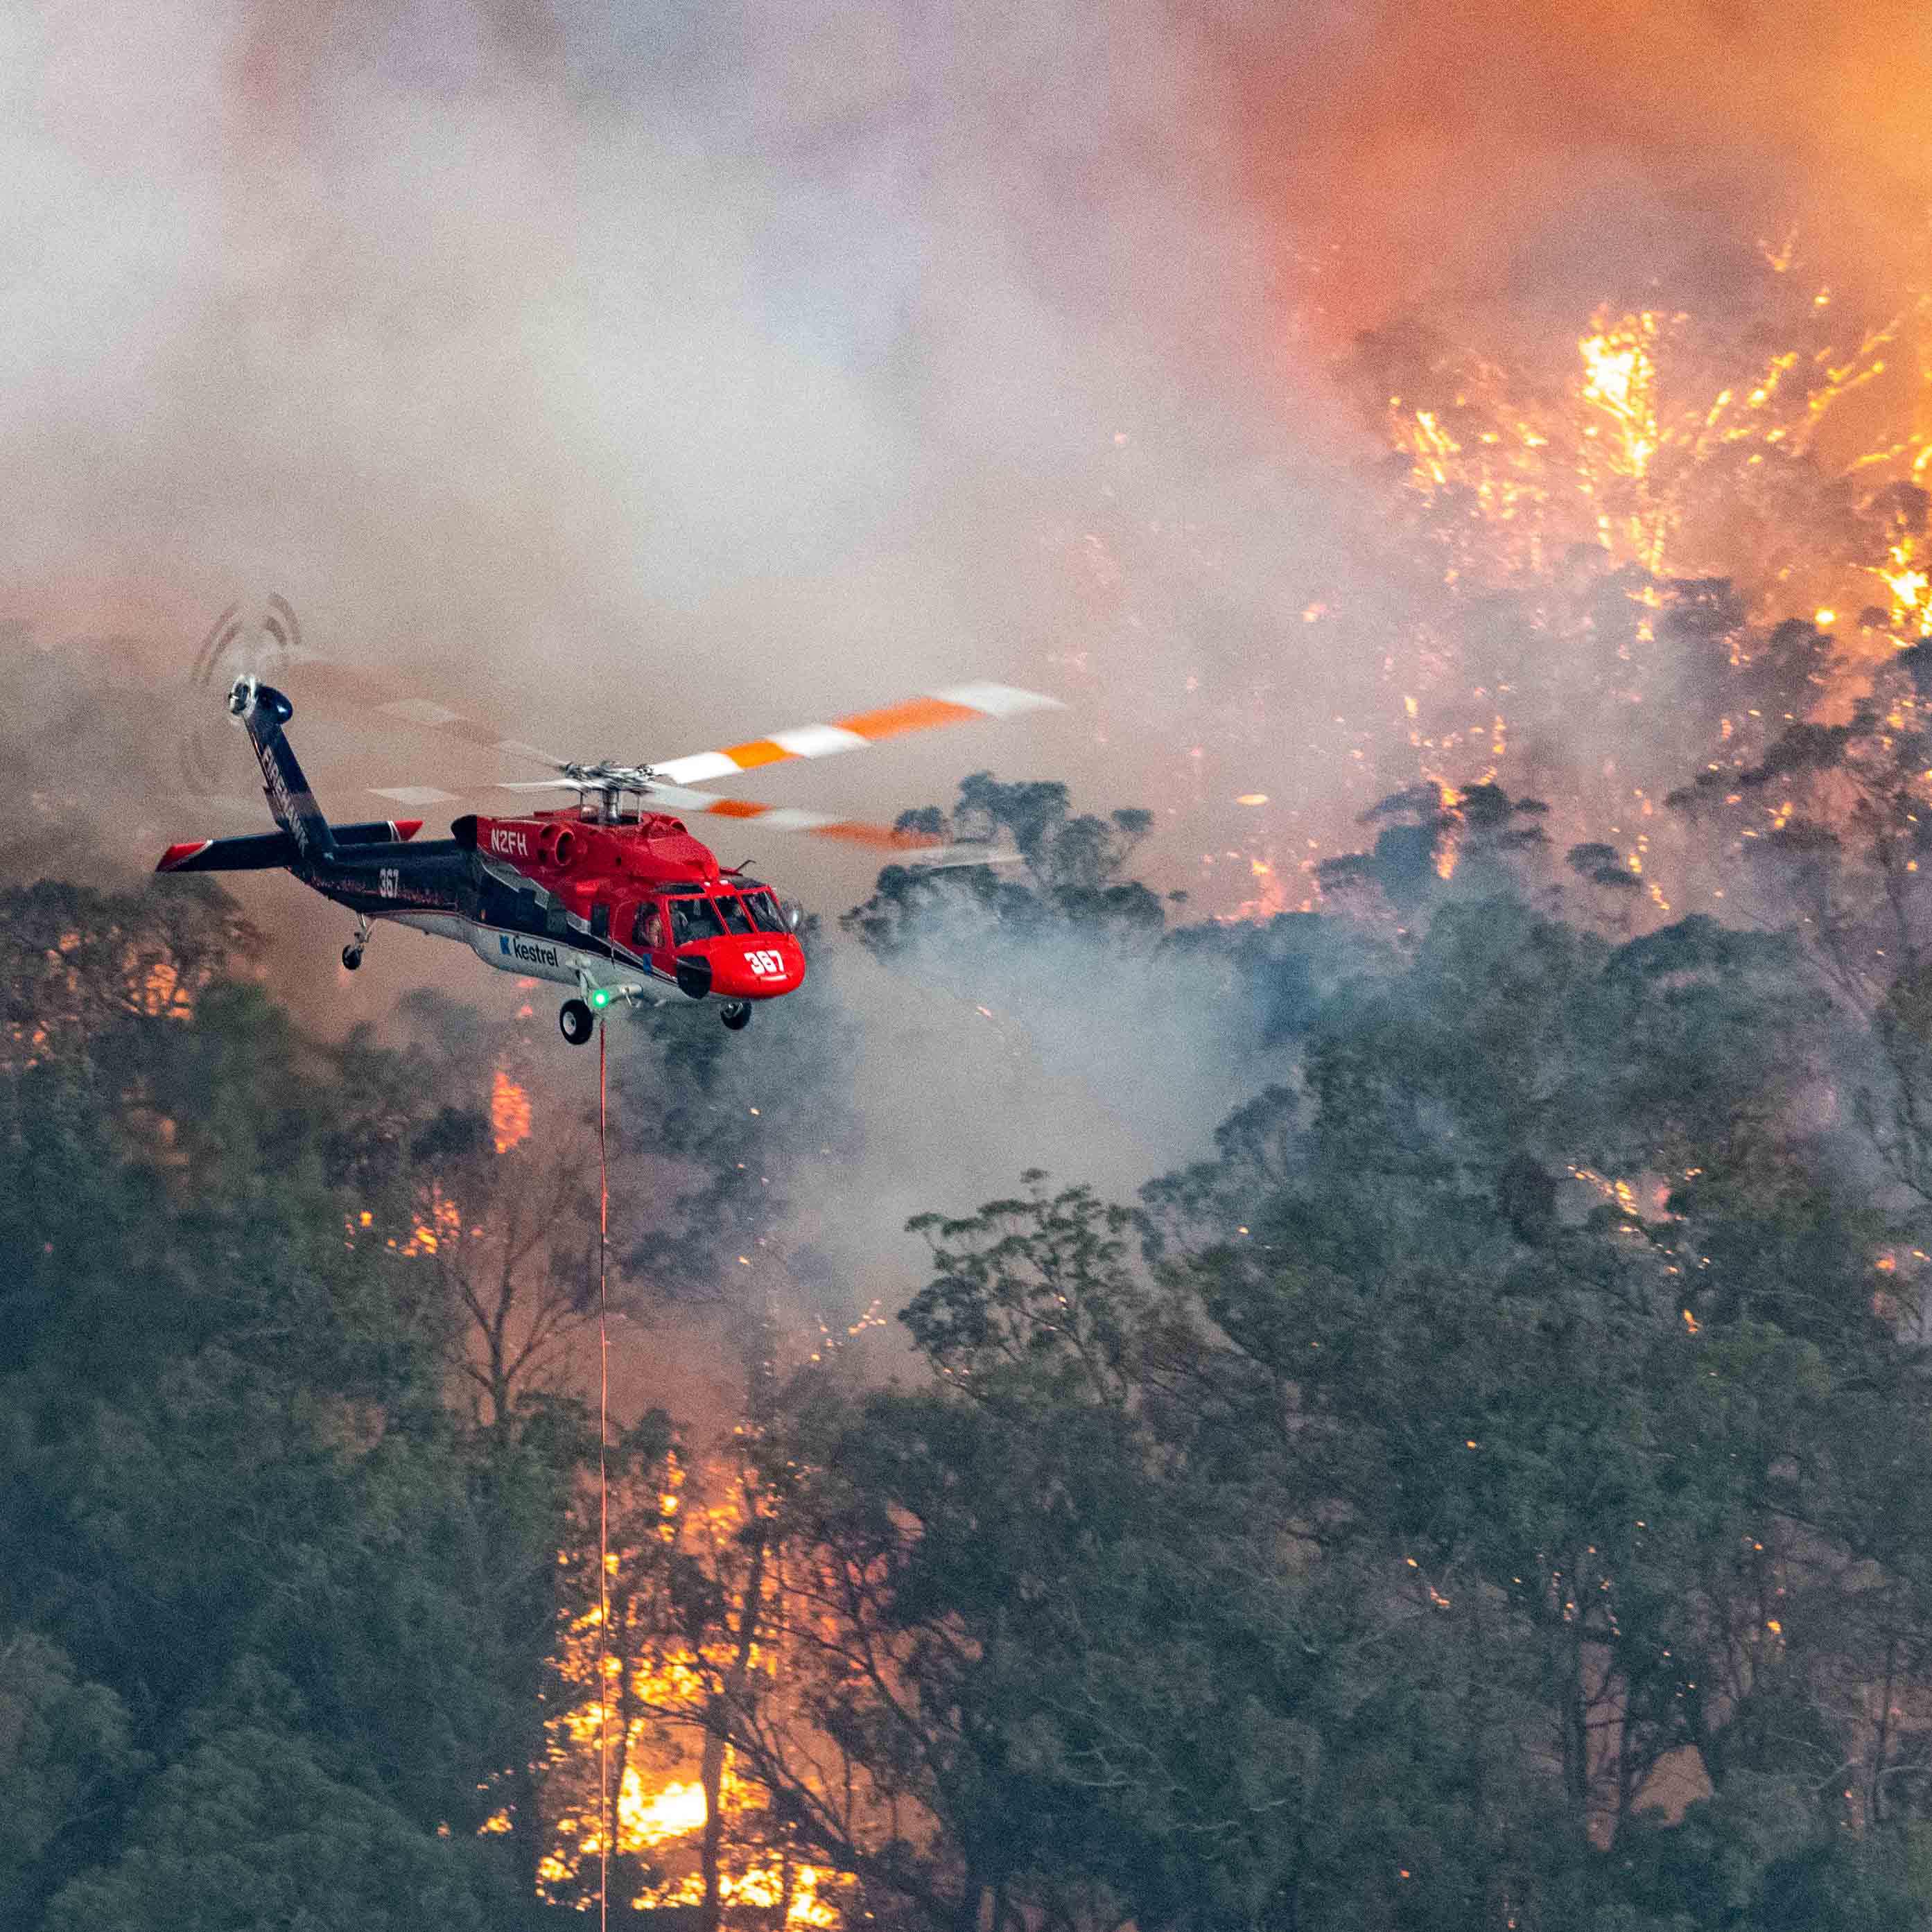 Photograph shows a firefighting helicopter at the Mallacoota fire.